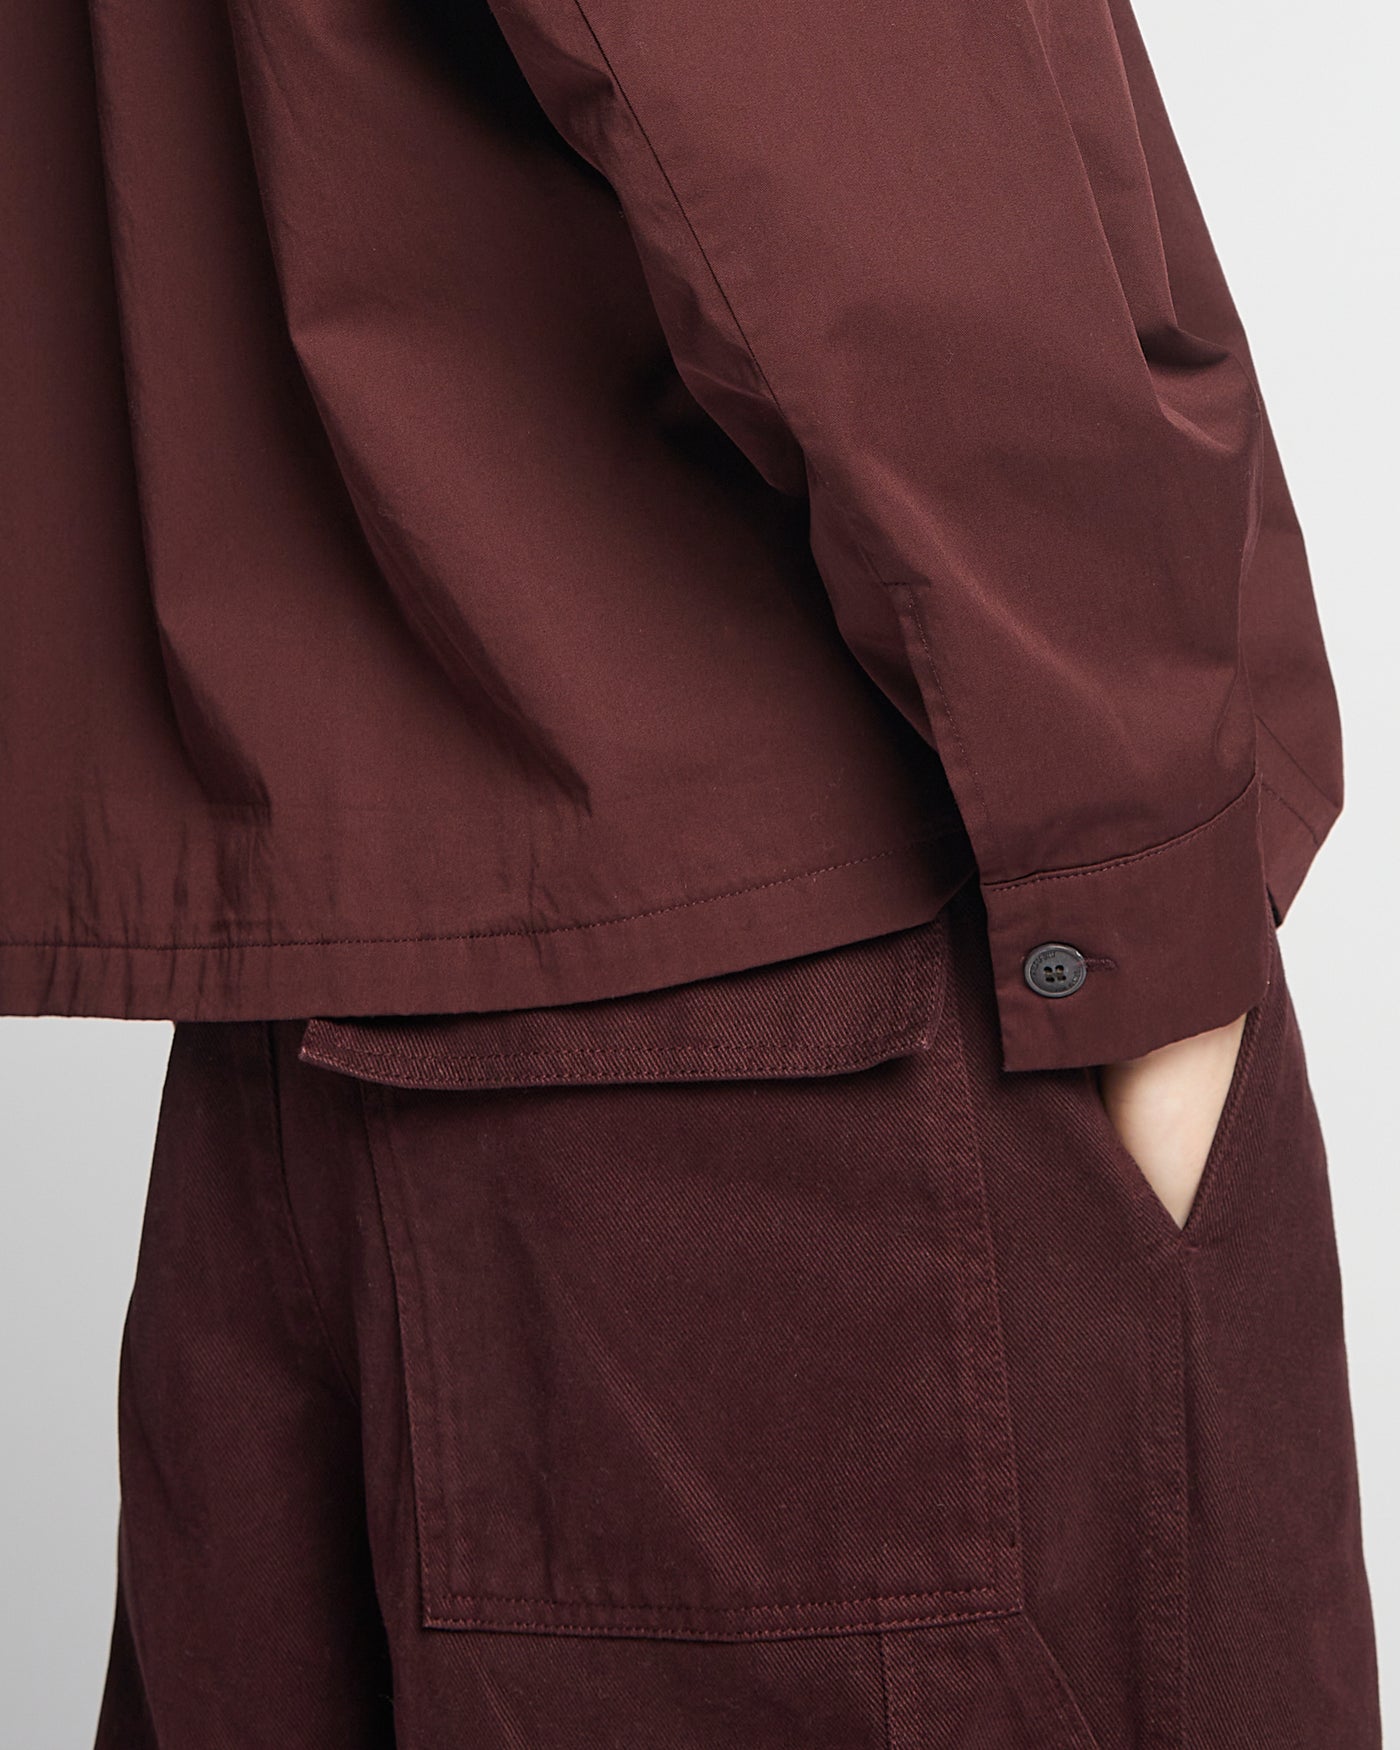 G.o.D British Worker Pants Brushed Twill Wine